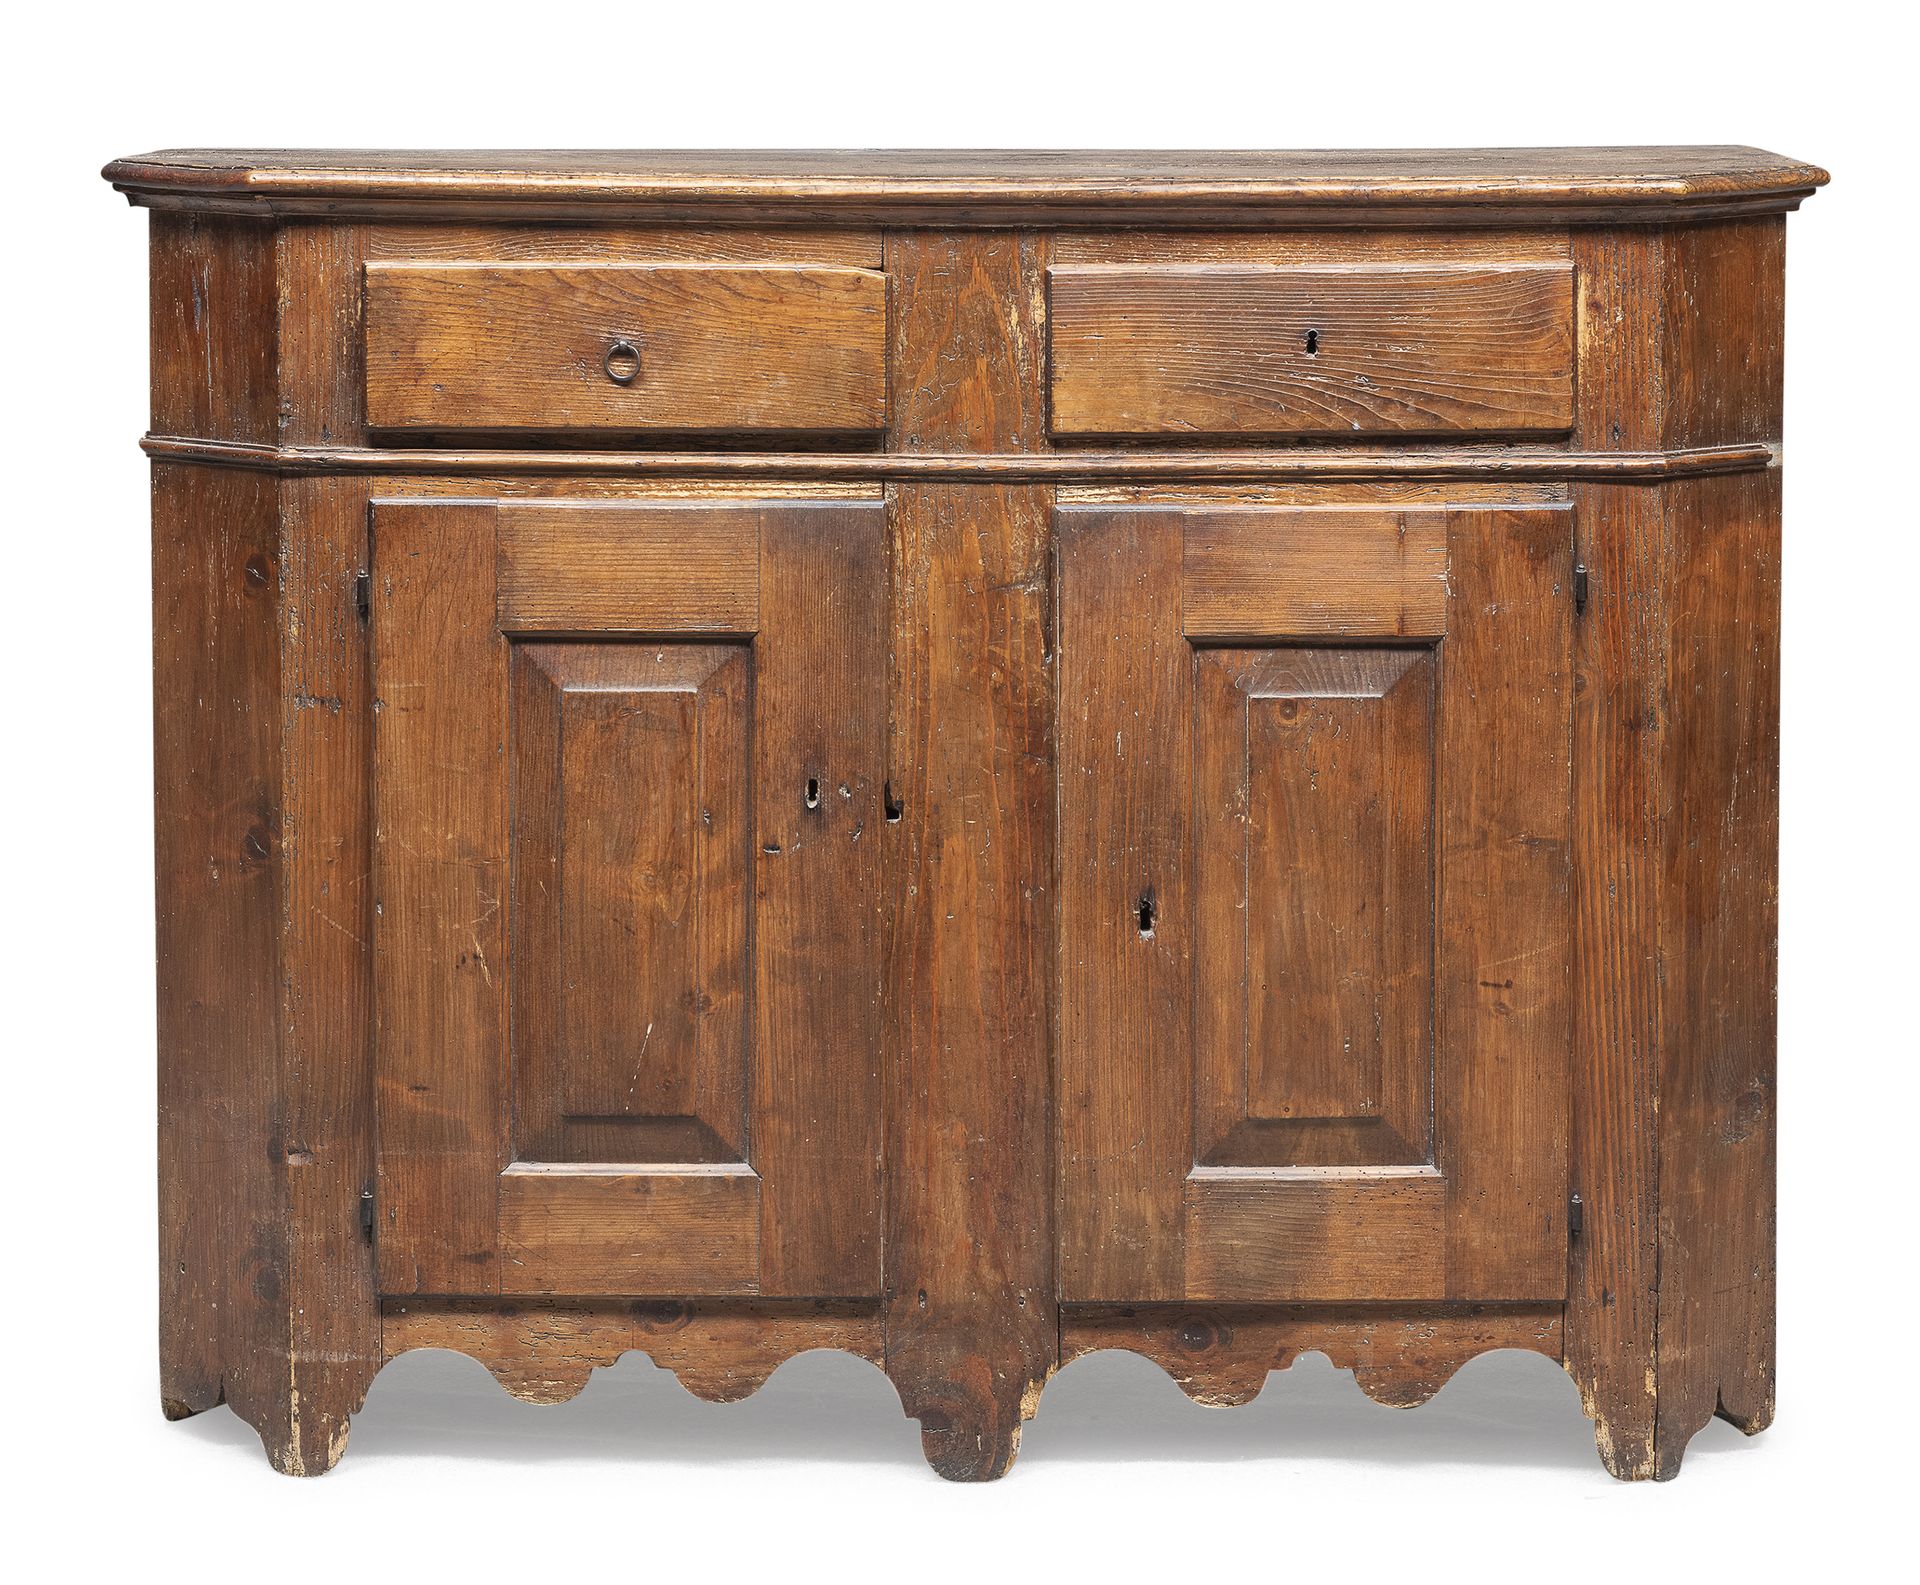 Null FIR SIDEBOARD, NORTHERN ITALY 18th CENTURY